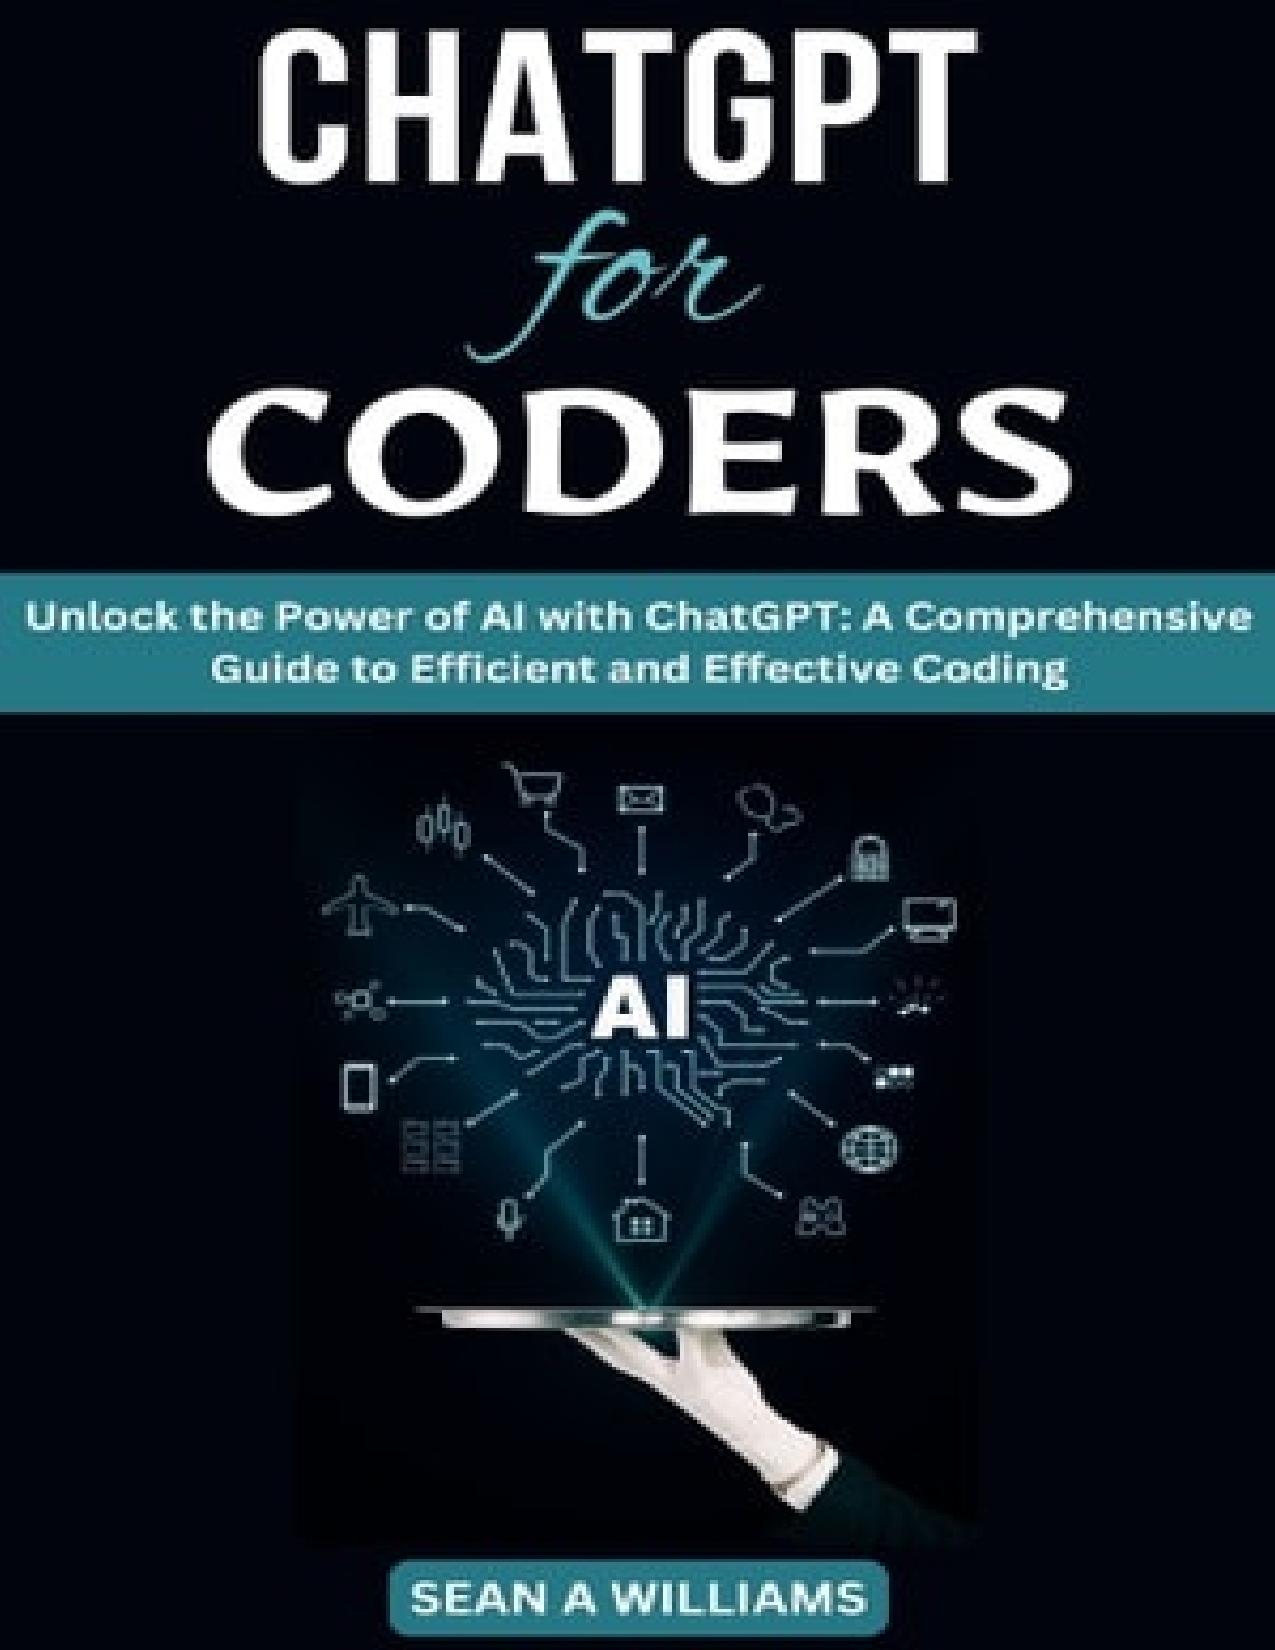 ChatGPT for Coders